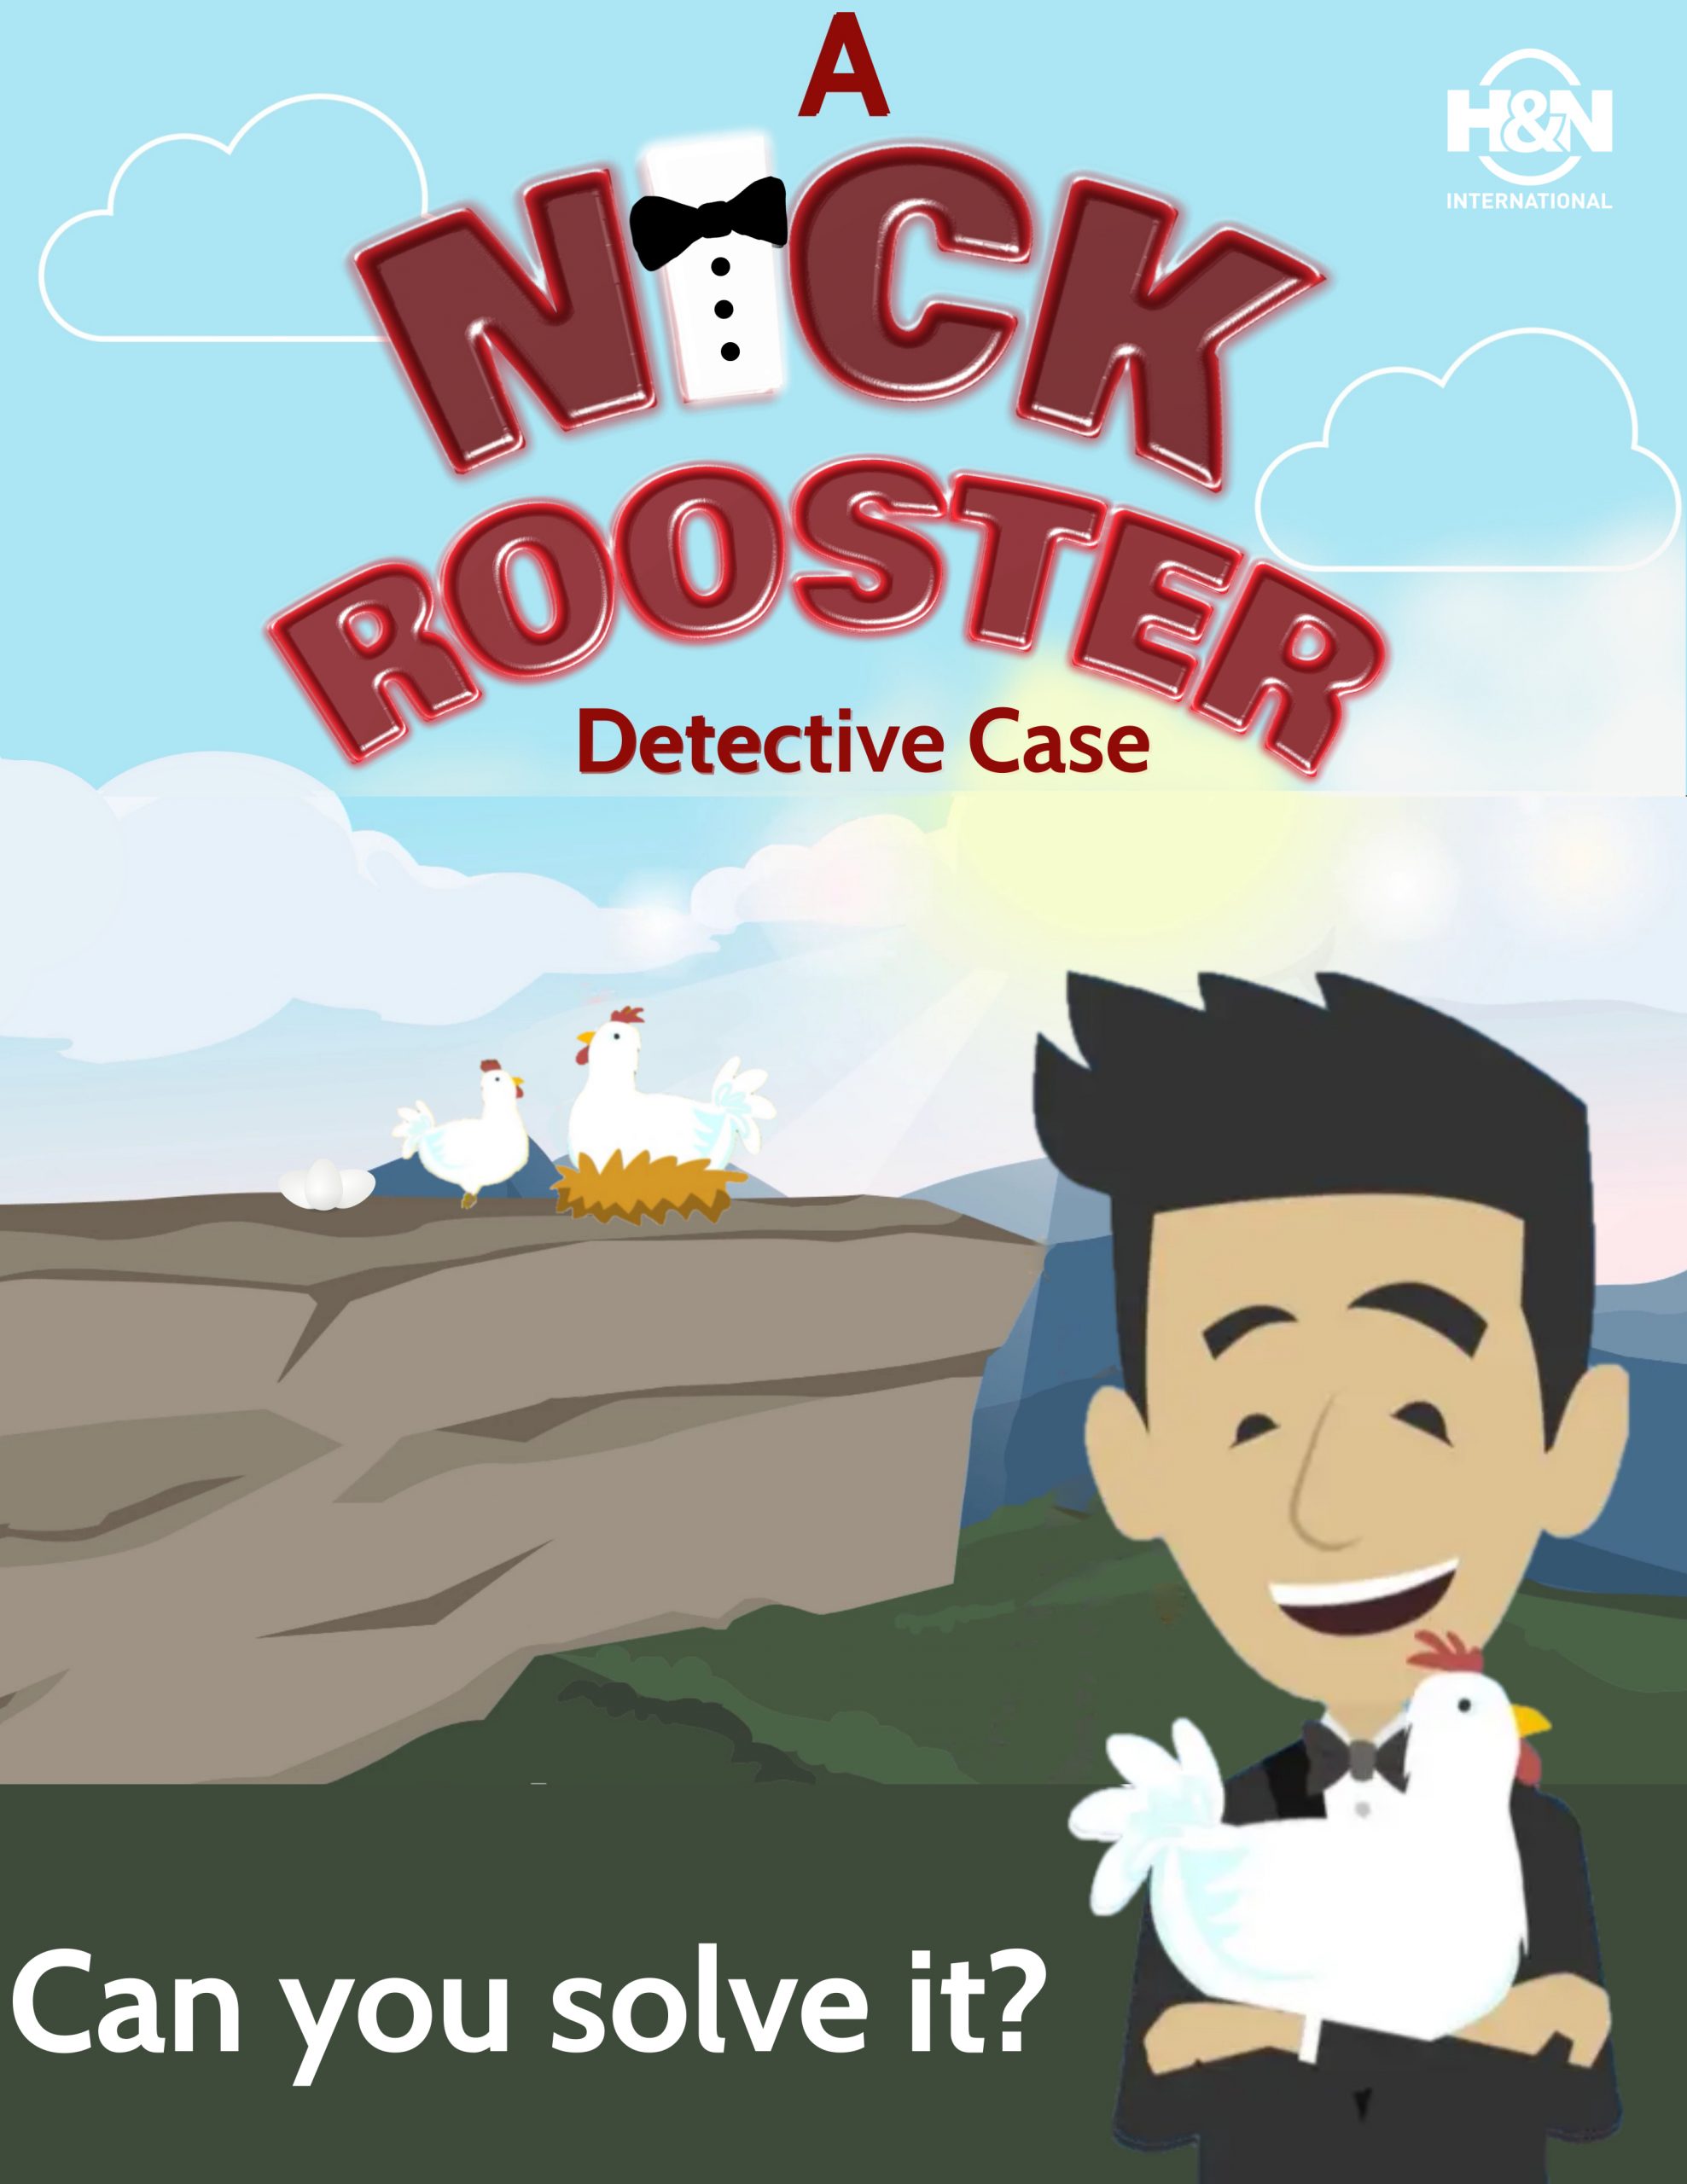 Nick Rooster case no. 4